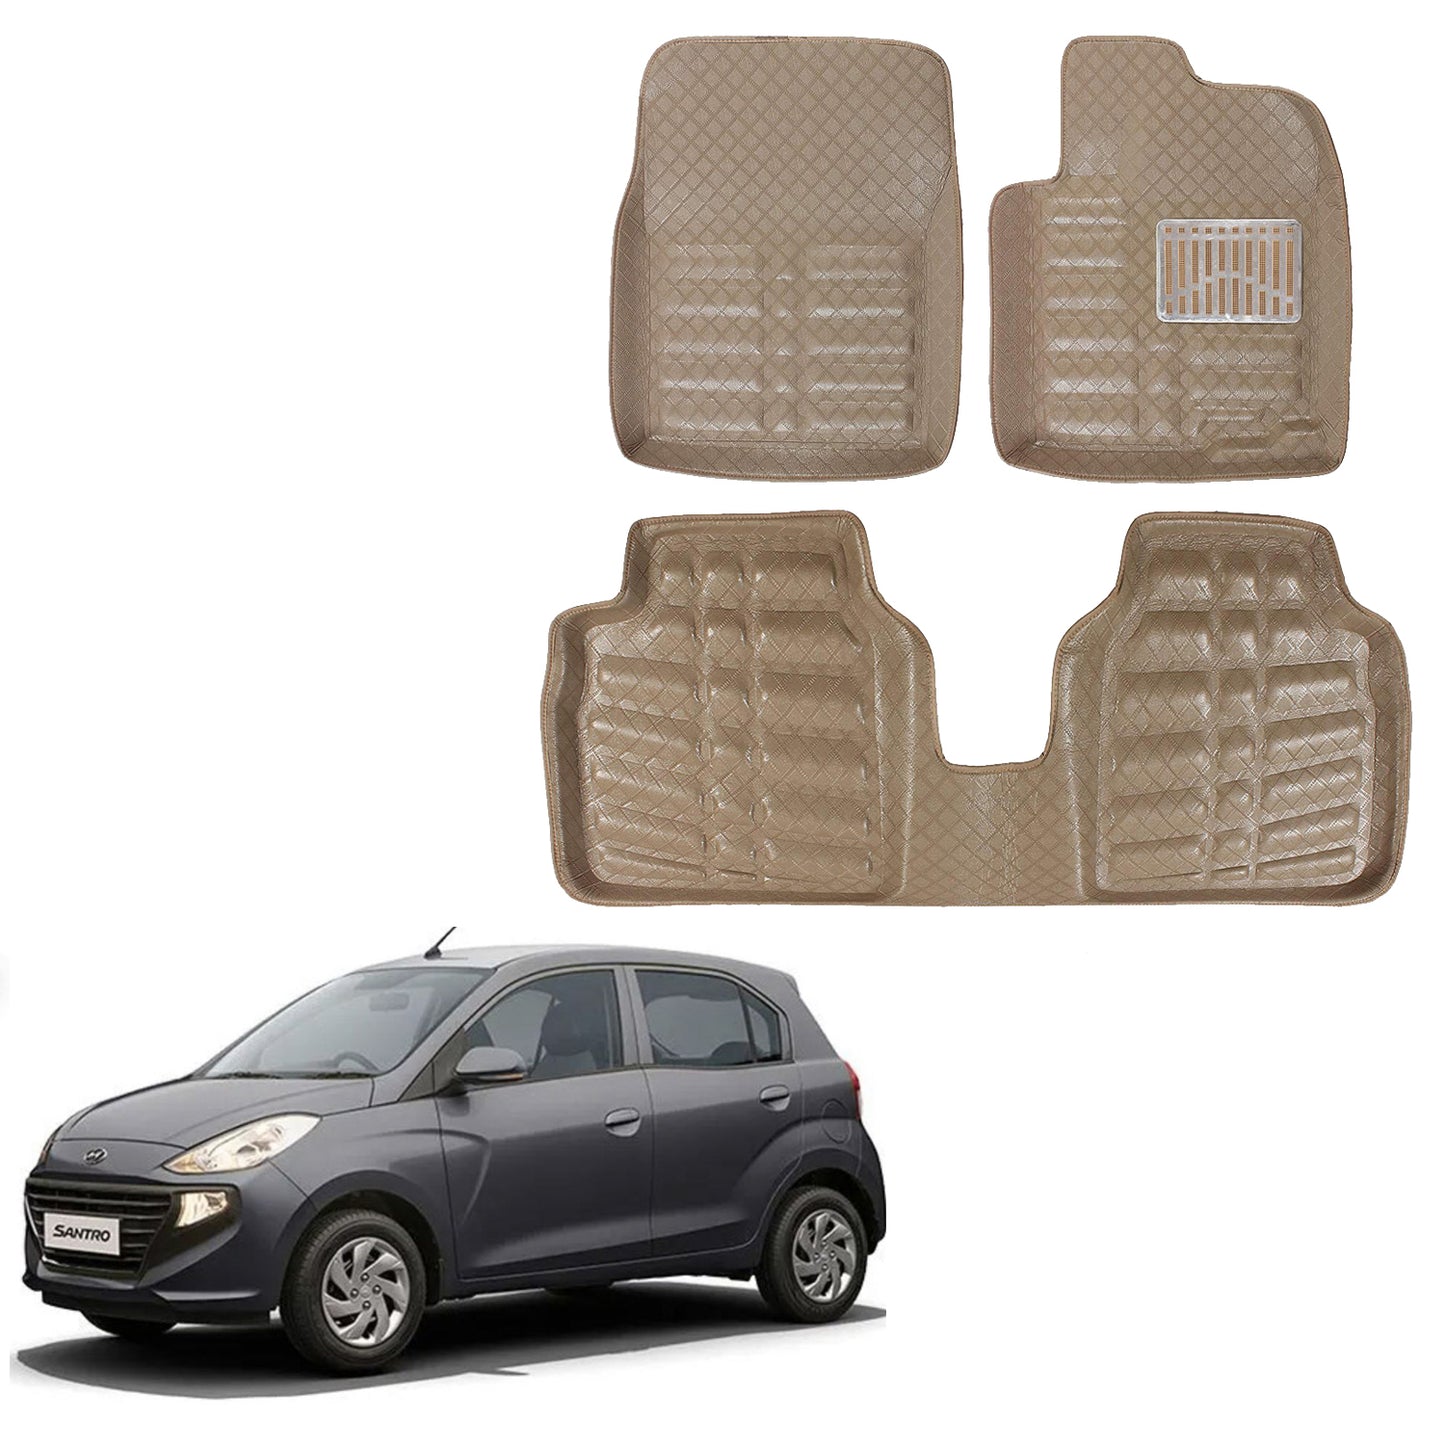 Oshotto 4D Artificial Leather Car Floor Mats For Hyundai New Santro 2018-2023 - Set of 3 (2 pcs Front & one Long Single Rear pc) - Beige